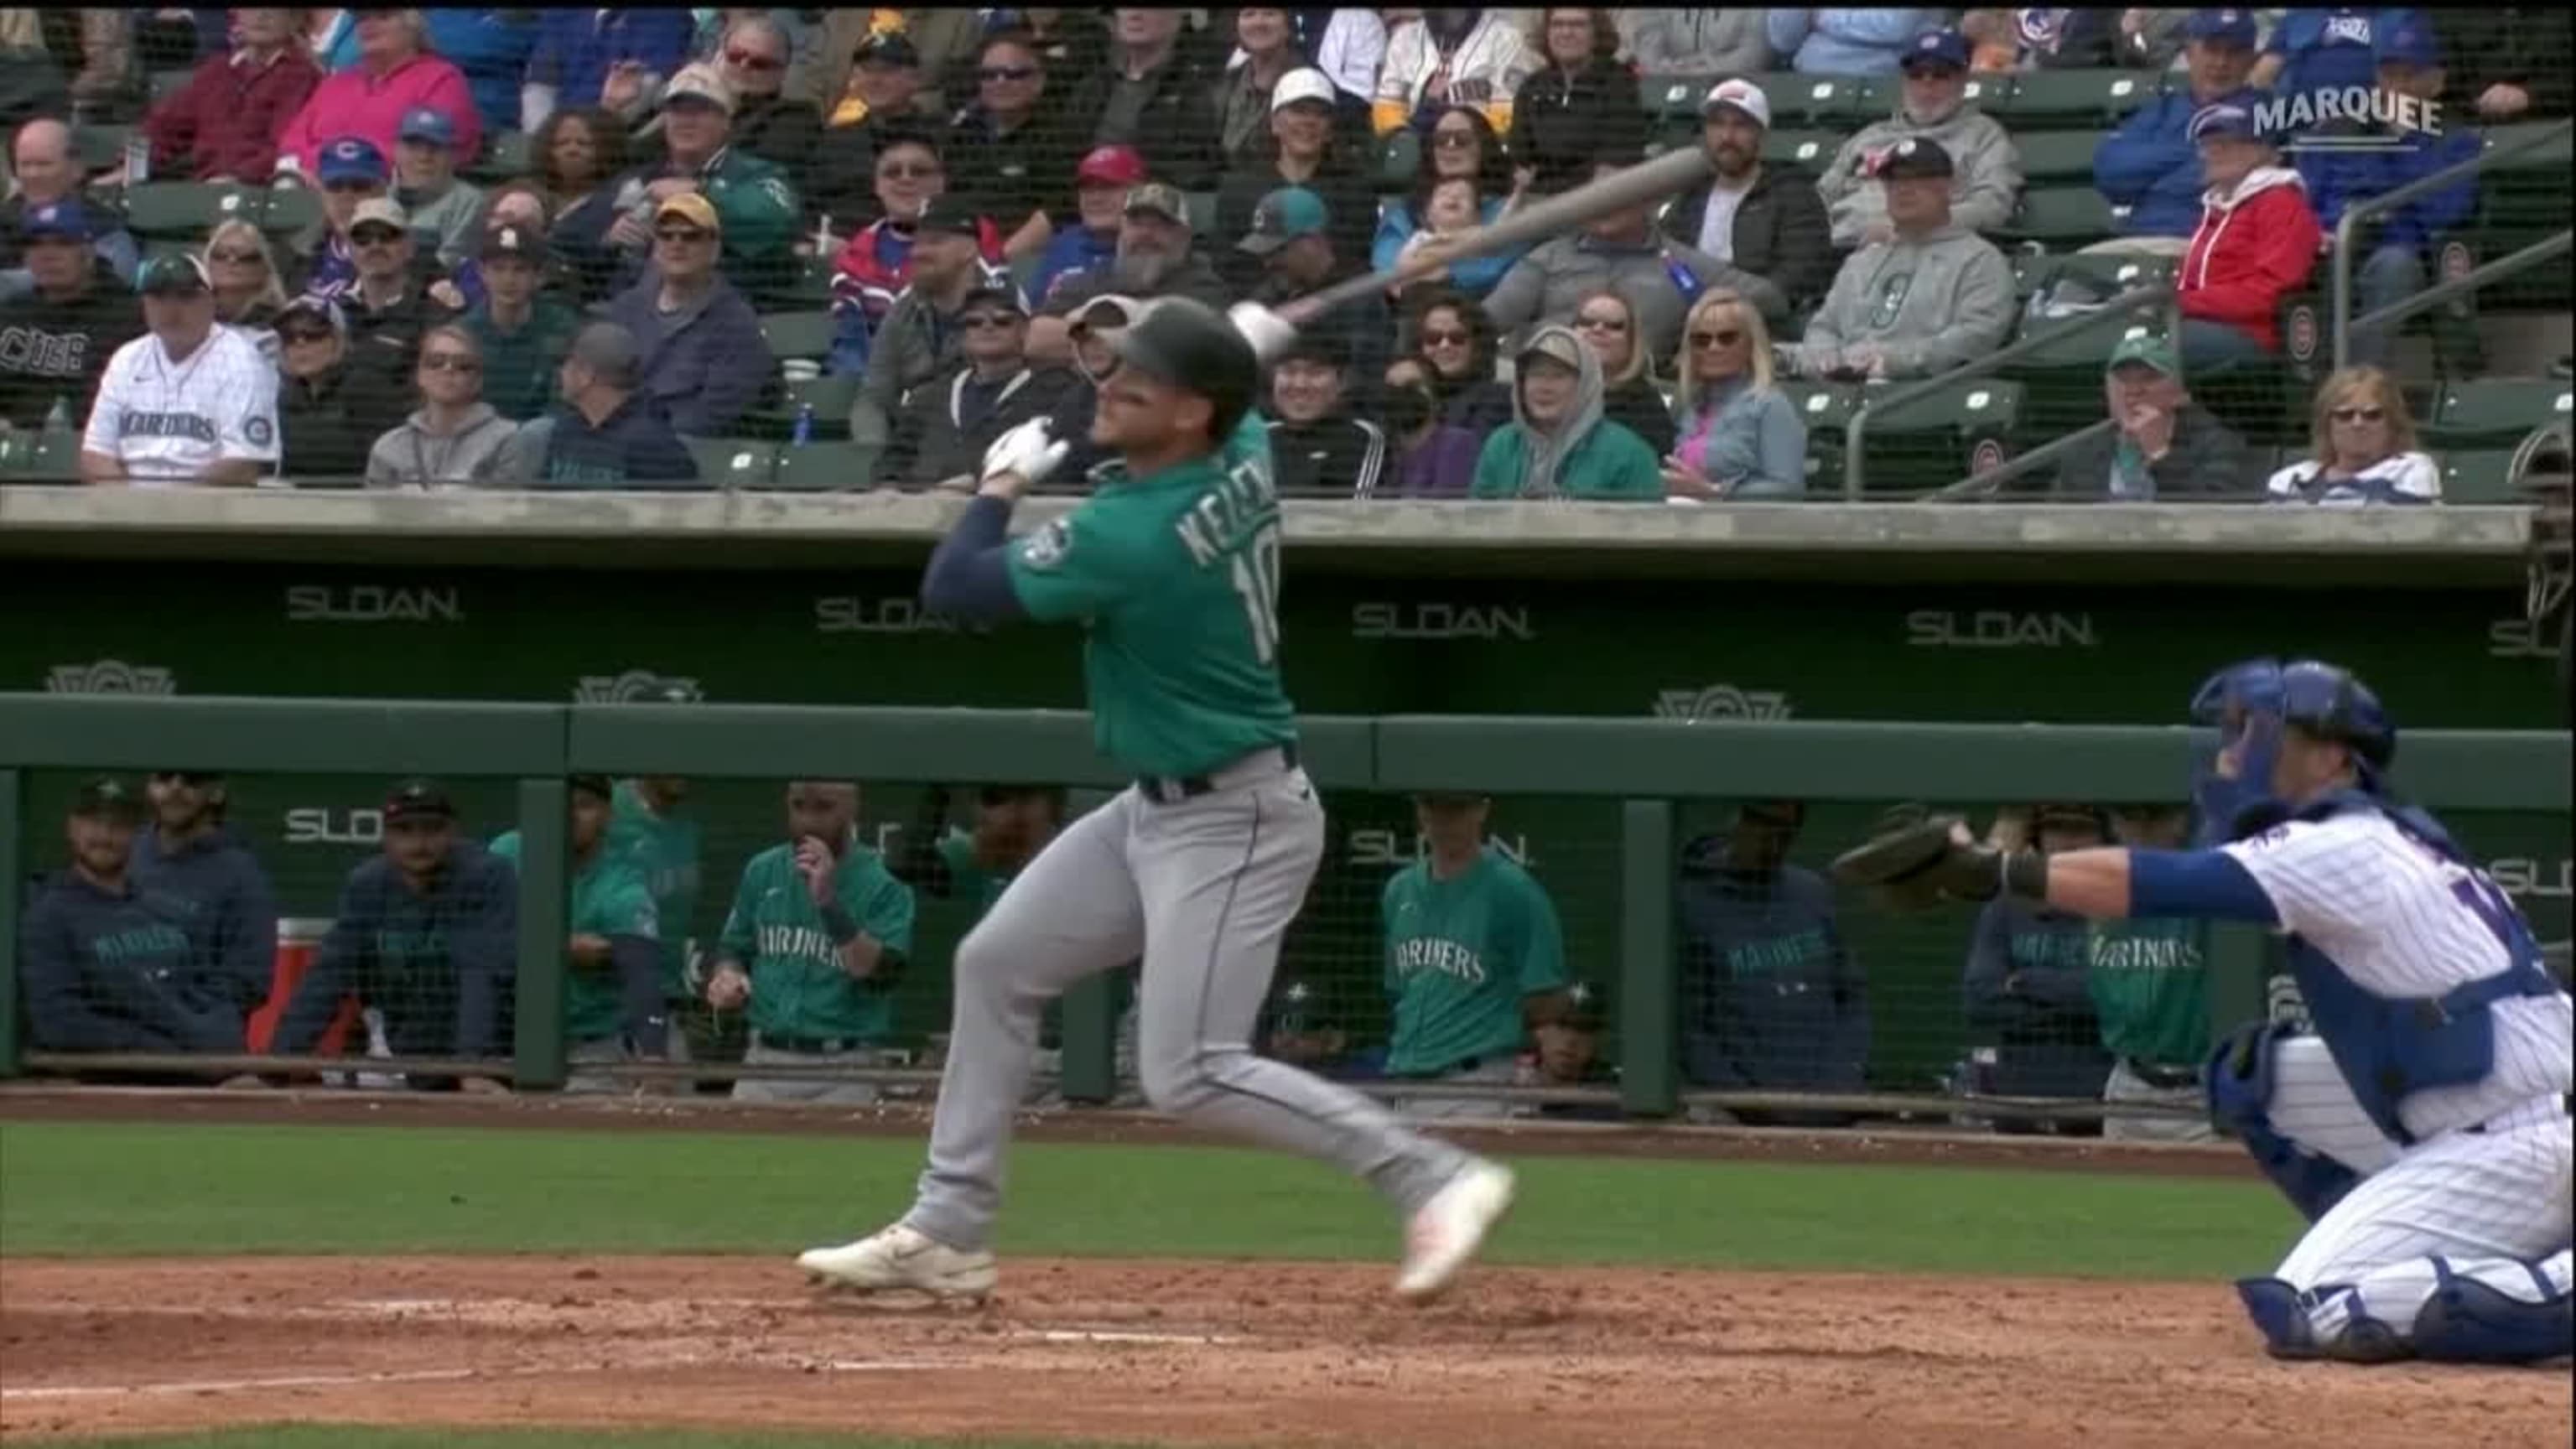 Julio Rodríguez homers, Mariners lose to Padres in spring training 2022 -  Lookout Landing